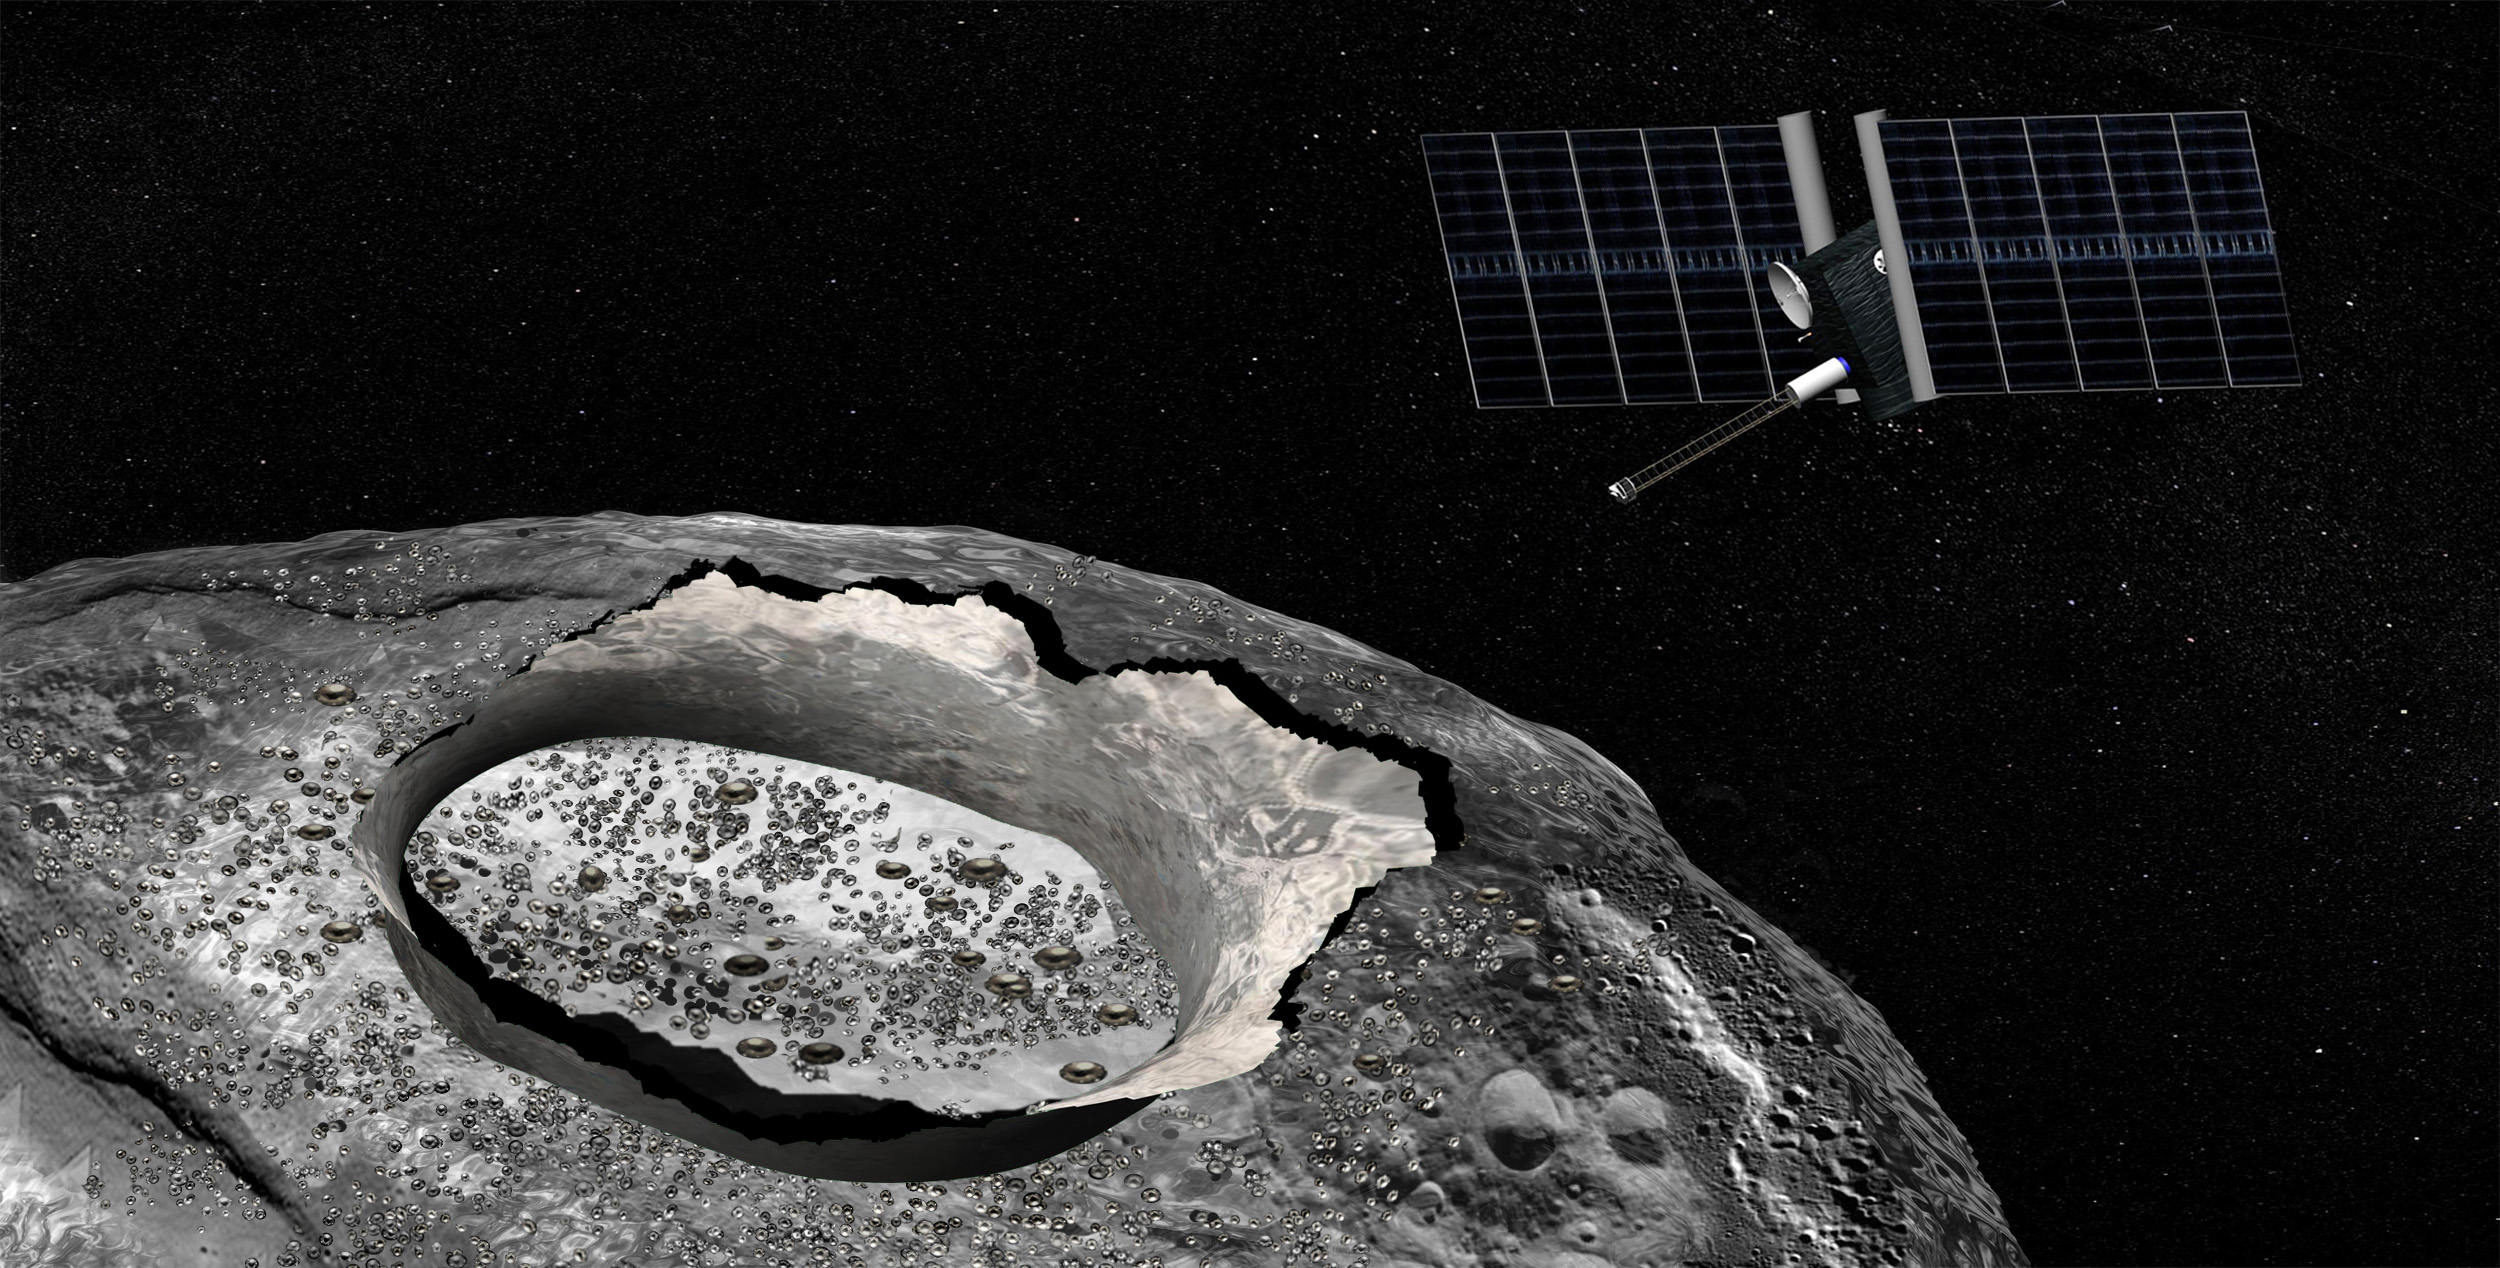 Giant Metallic Asteroid Psyche May Have Water